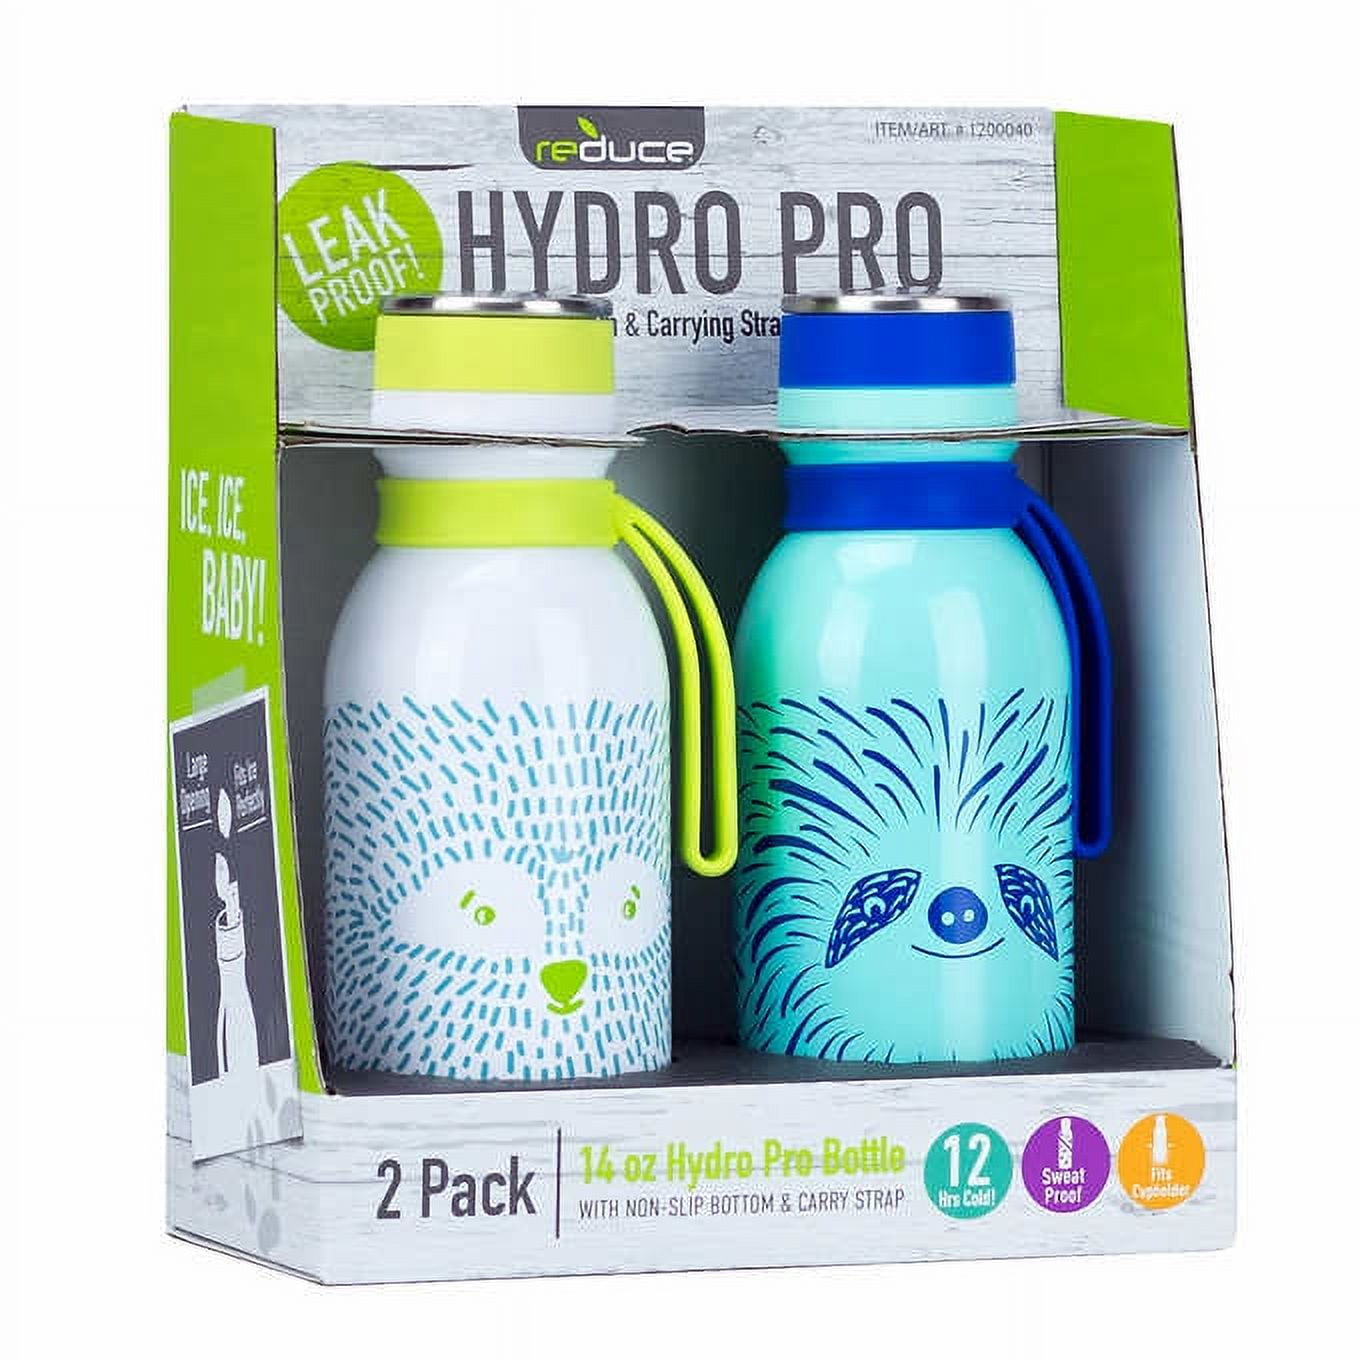 reduce Stainless Steel Hydro Pro Kids Water Bottle, 14oz - Vacuum Insulated  Leak Proof Water Bottle for Kids - Great for On the Go and Lunchboxes -  Furry Friends Design, Blue Sloth